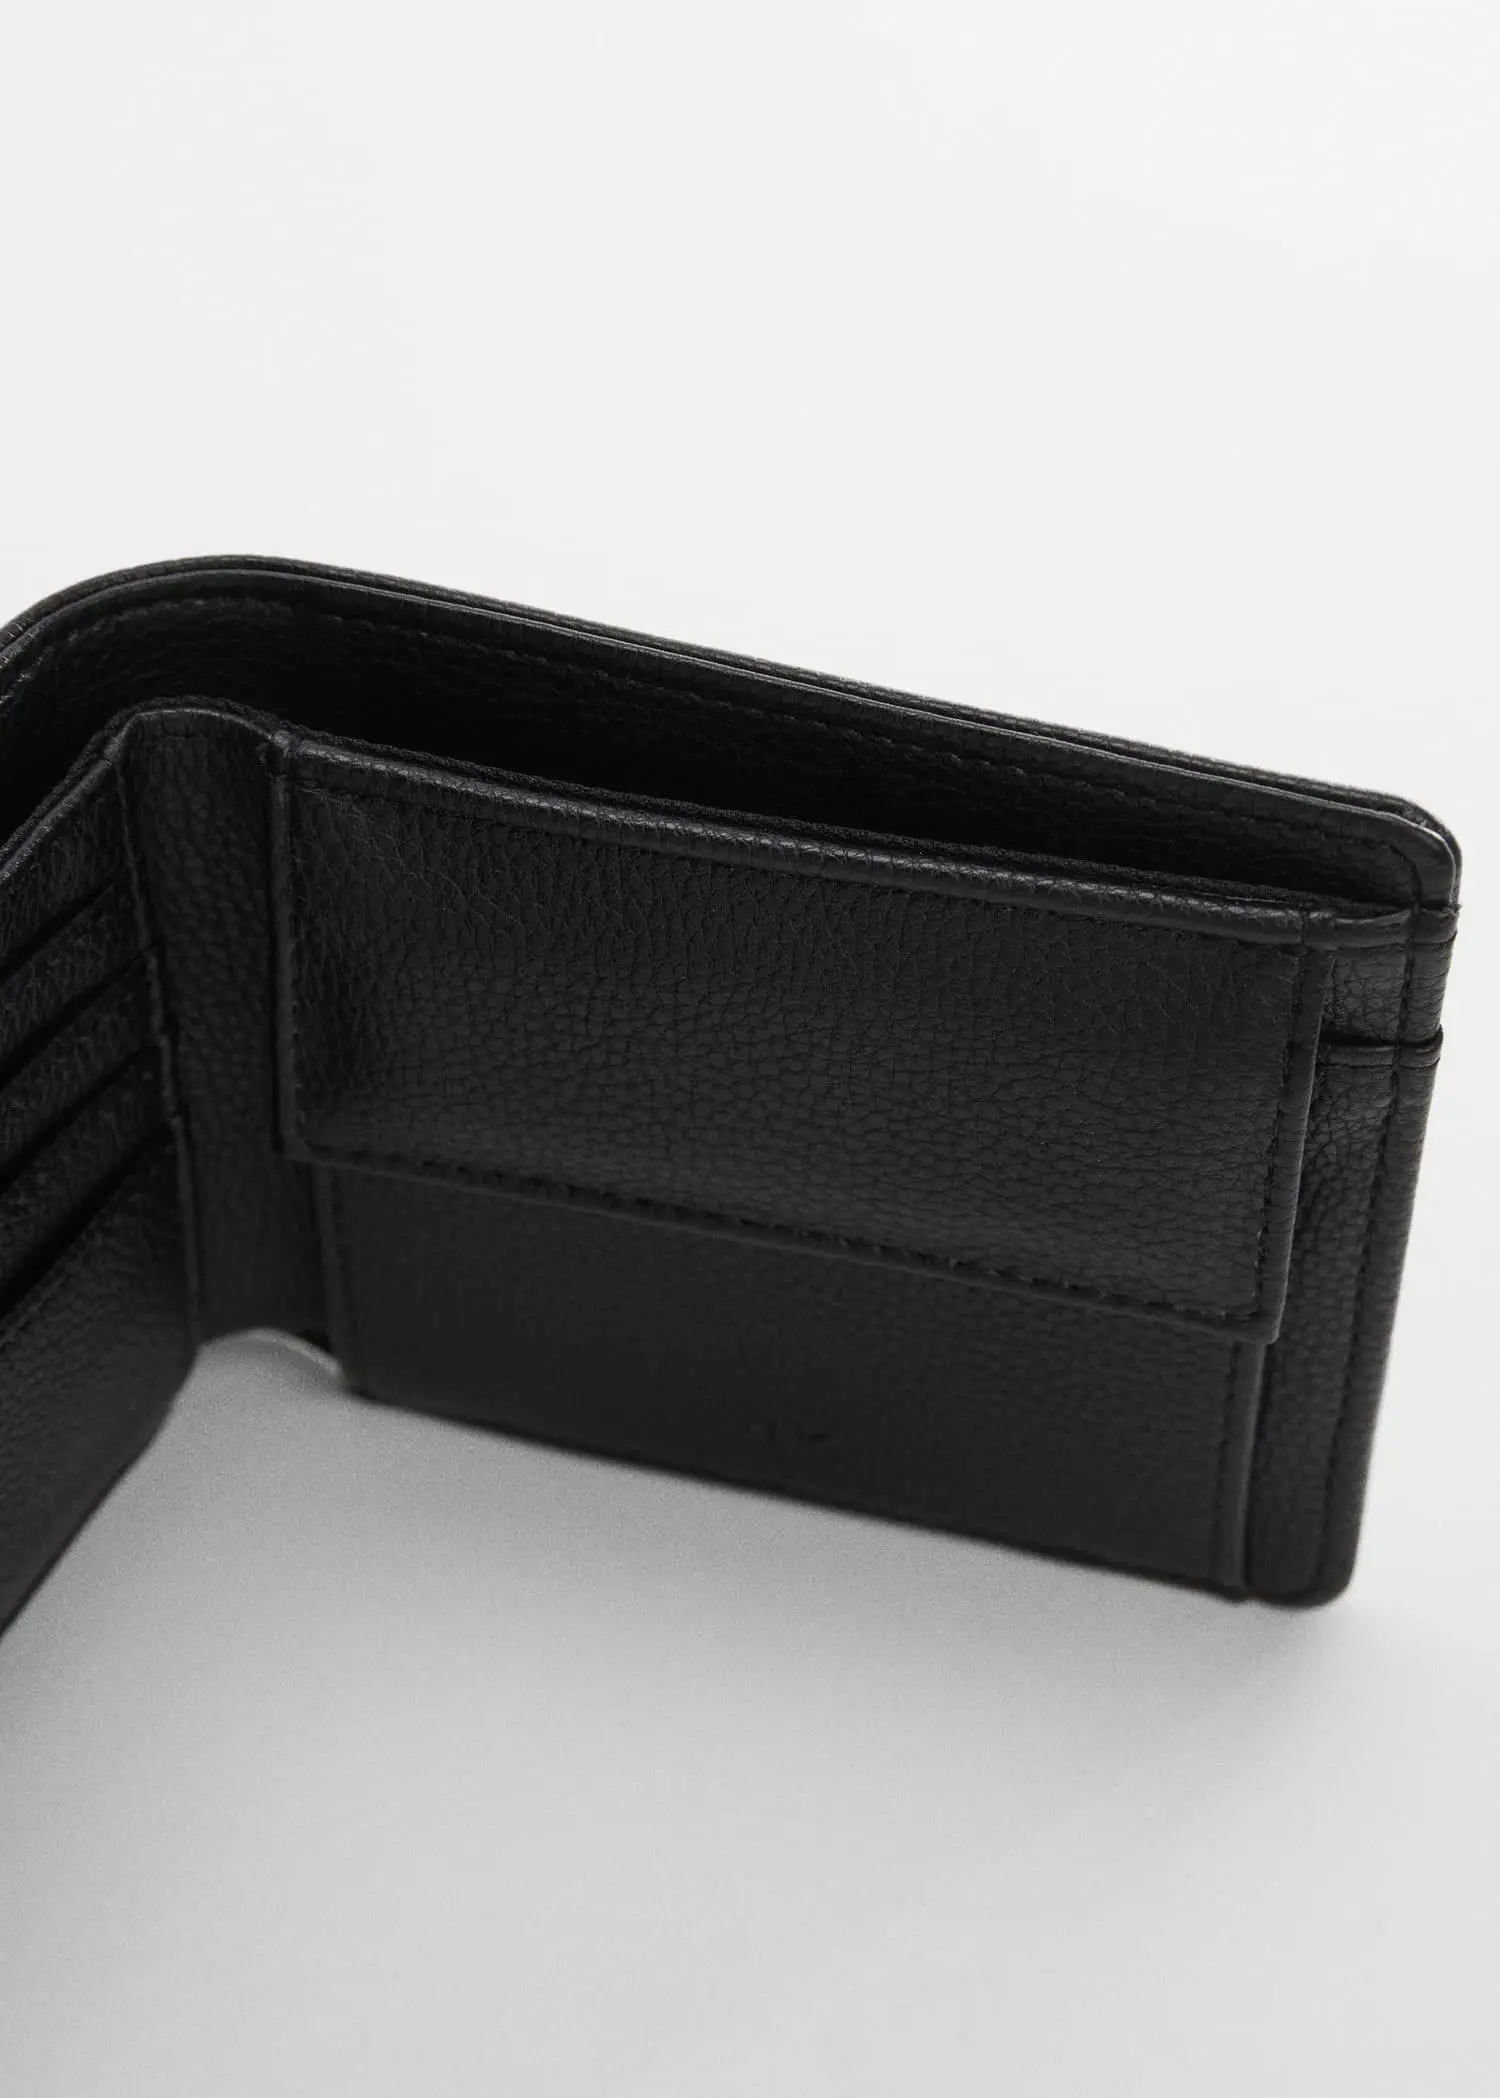 Mango Anti-contactless wallet. a close-up of the inside of a black wallet. 